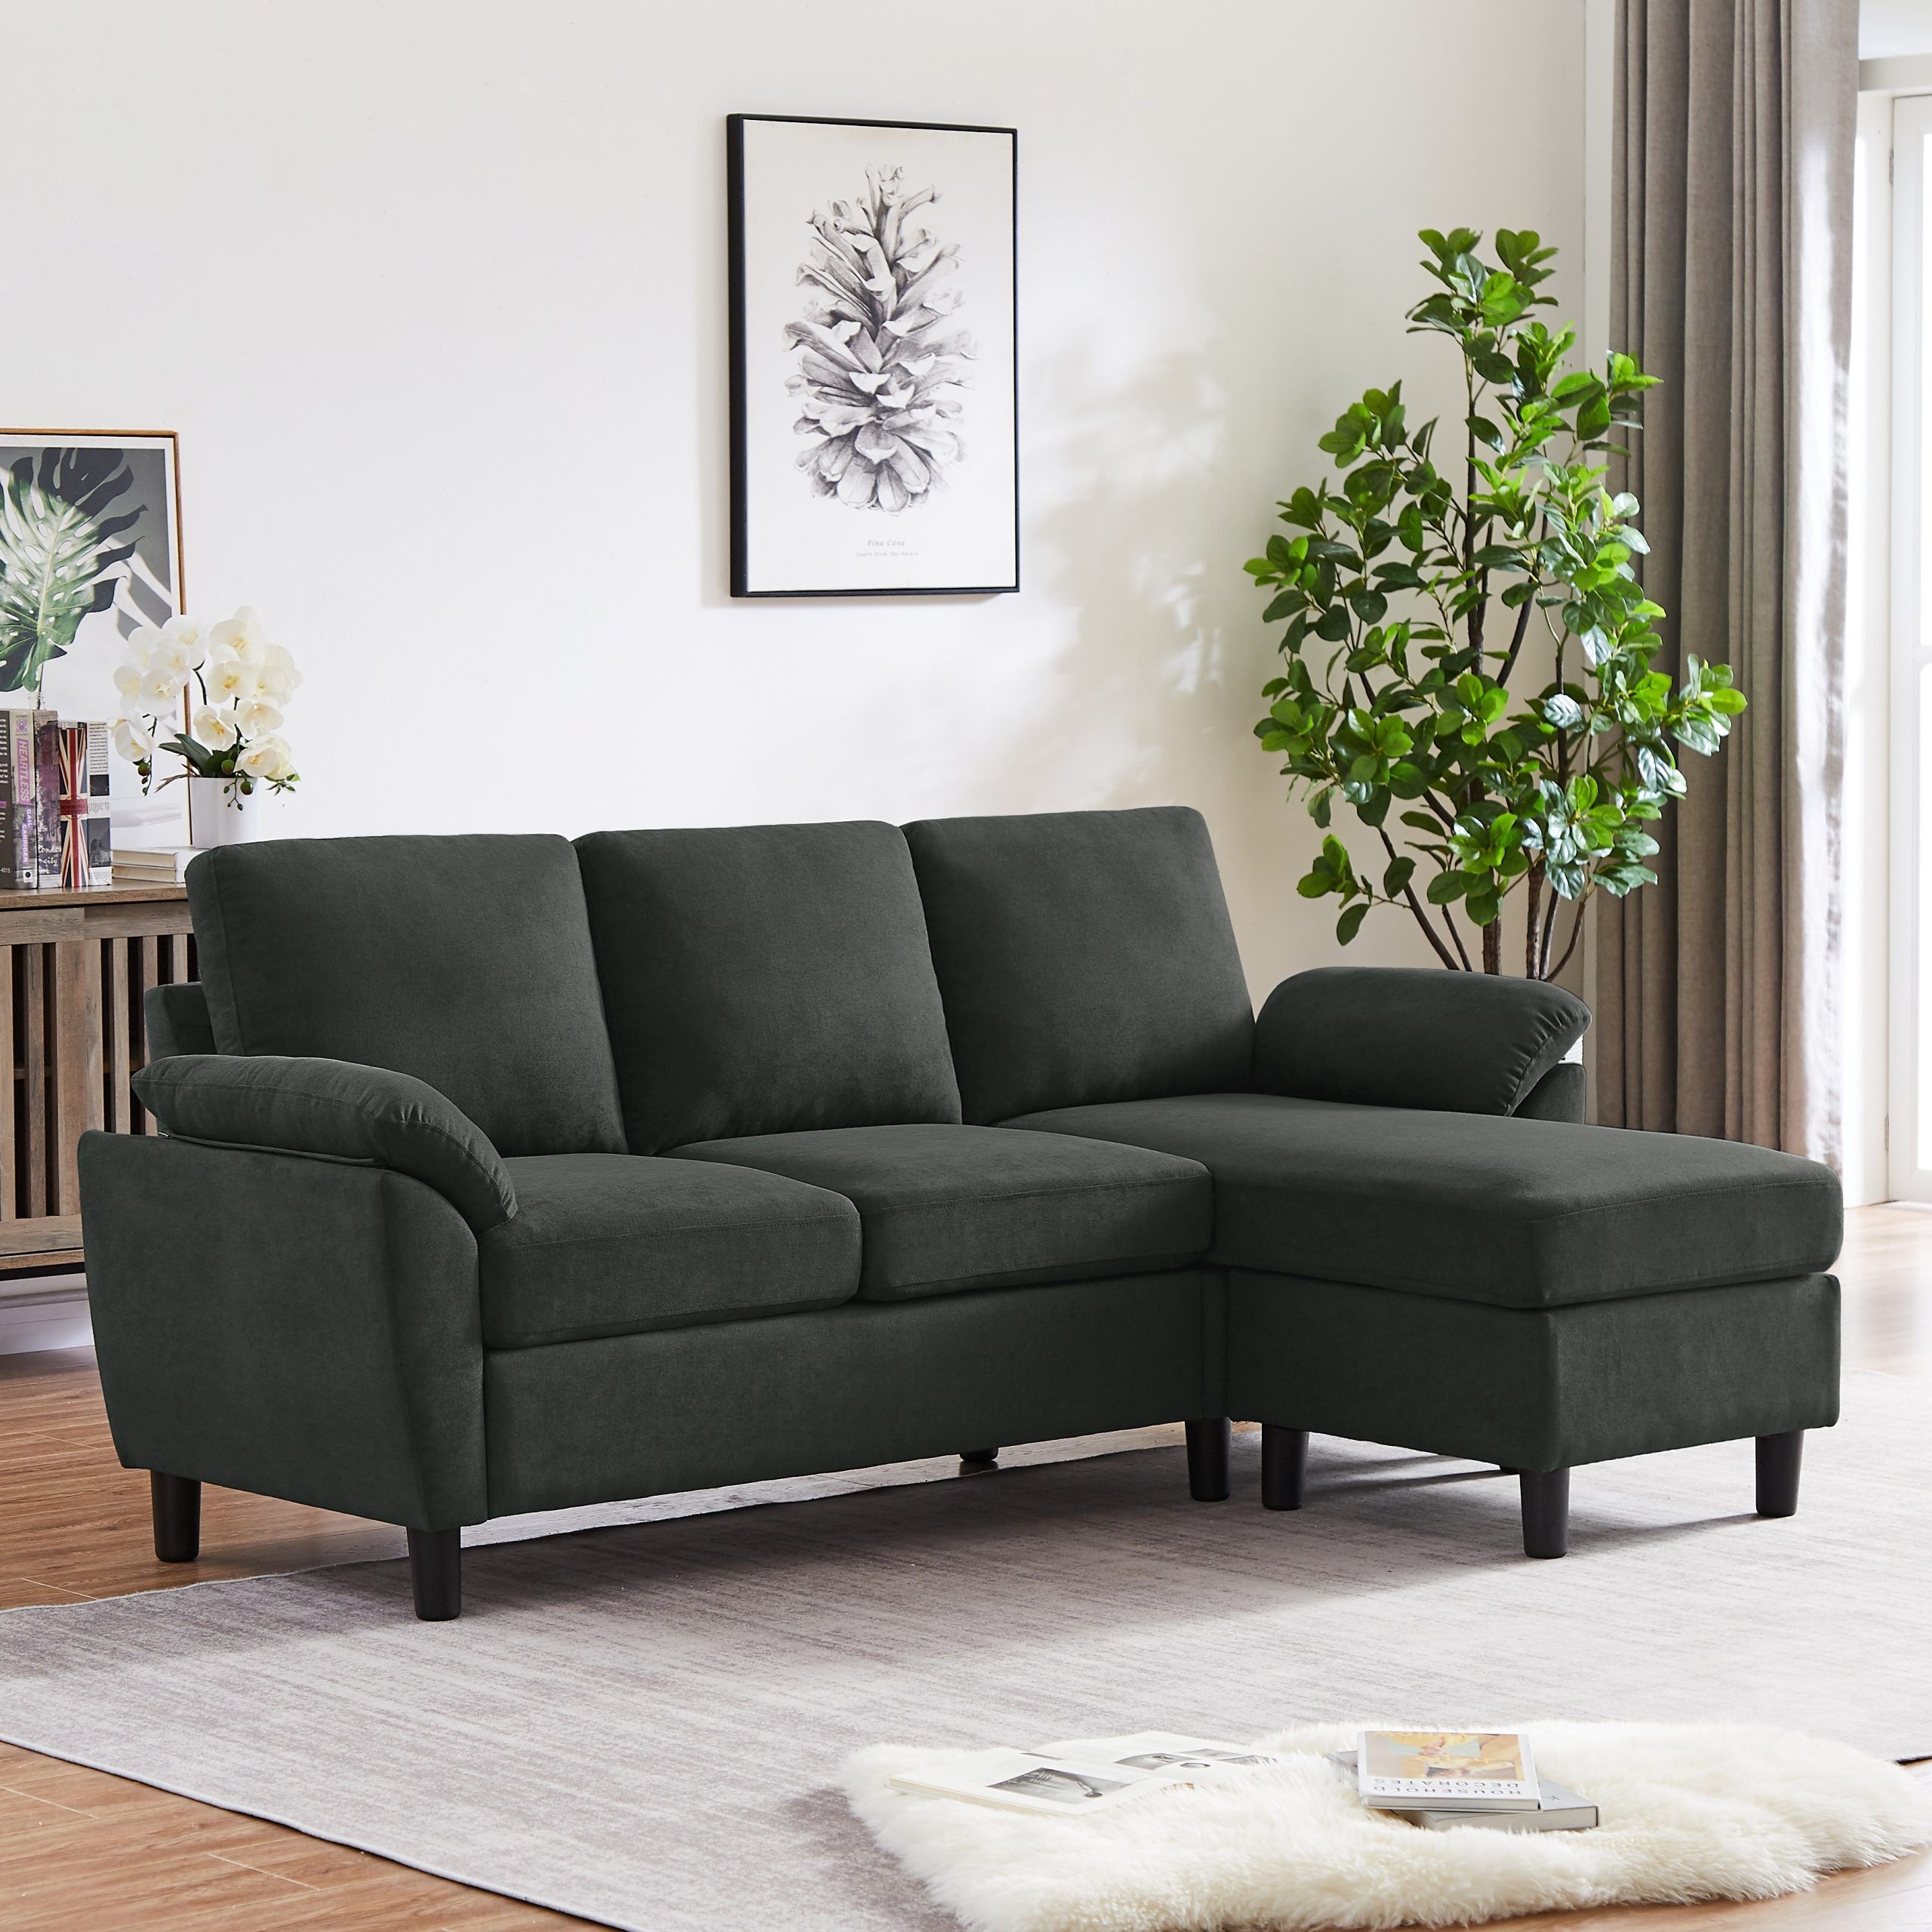 Modern Sectional Sofa Couch L Shaped With Removable Armrest, Convertible  Couch With Reversible Ottoman For Living Room – Bed Bath & Beyond – 36983057 Within Convertible L Shaped Sectional Sofas (View 3 of 24)